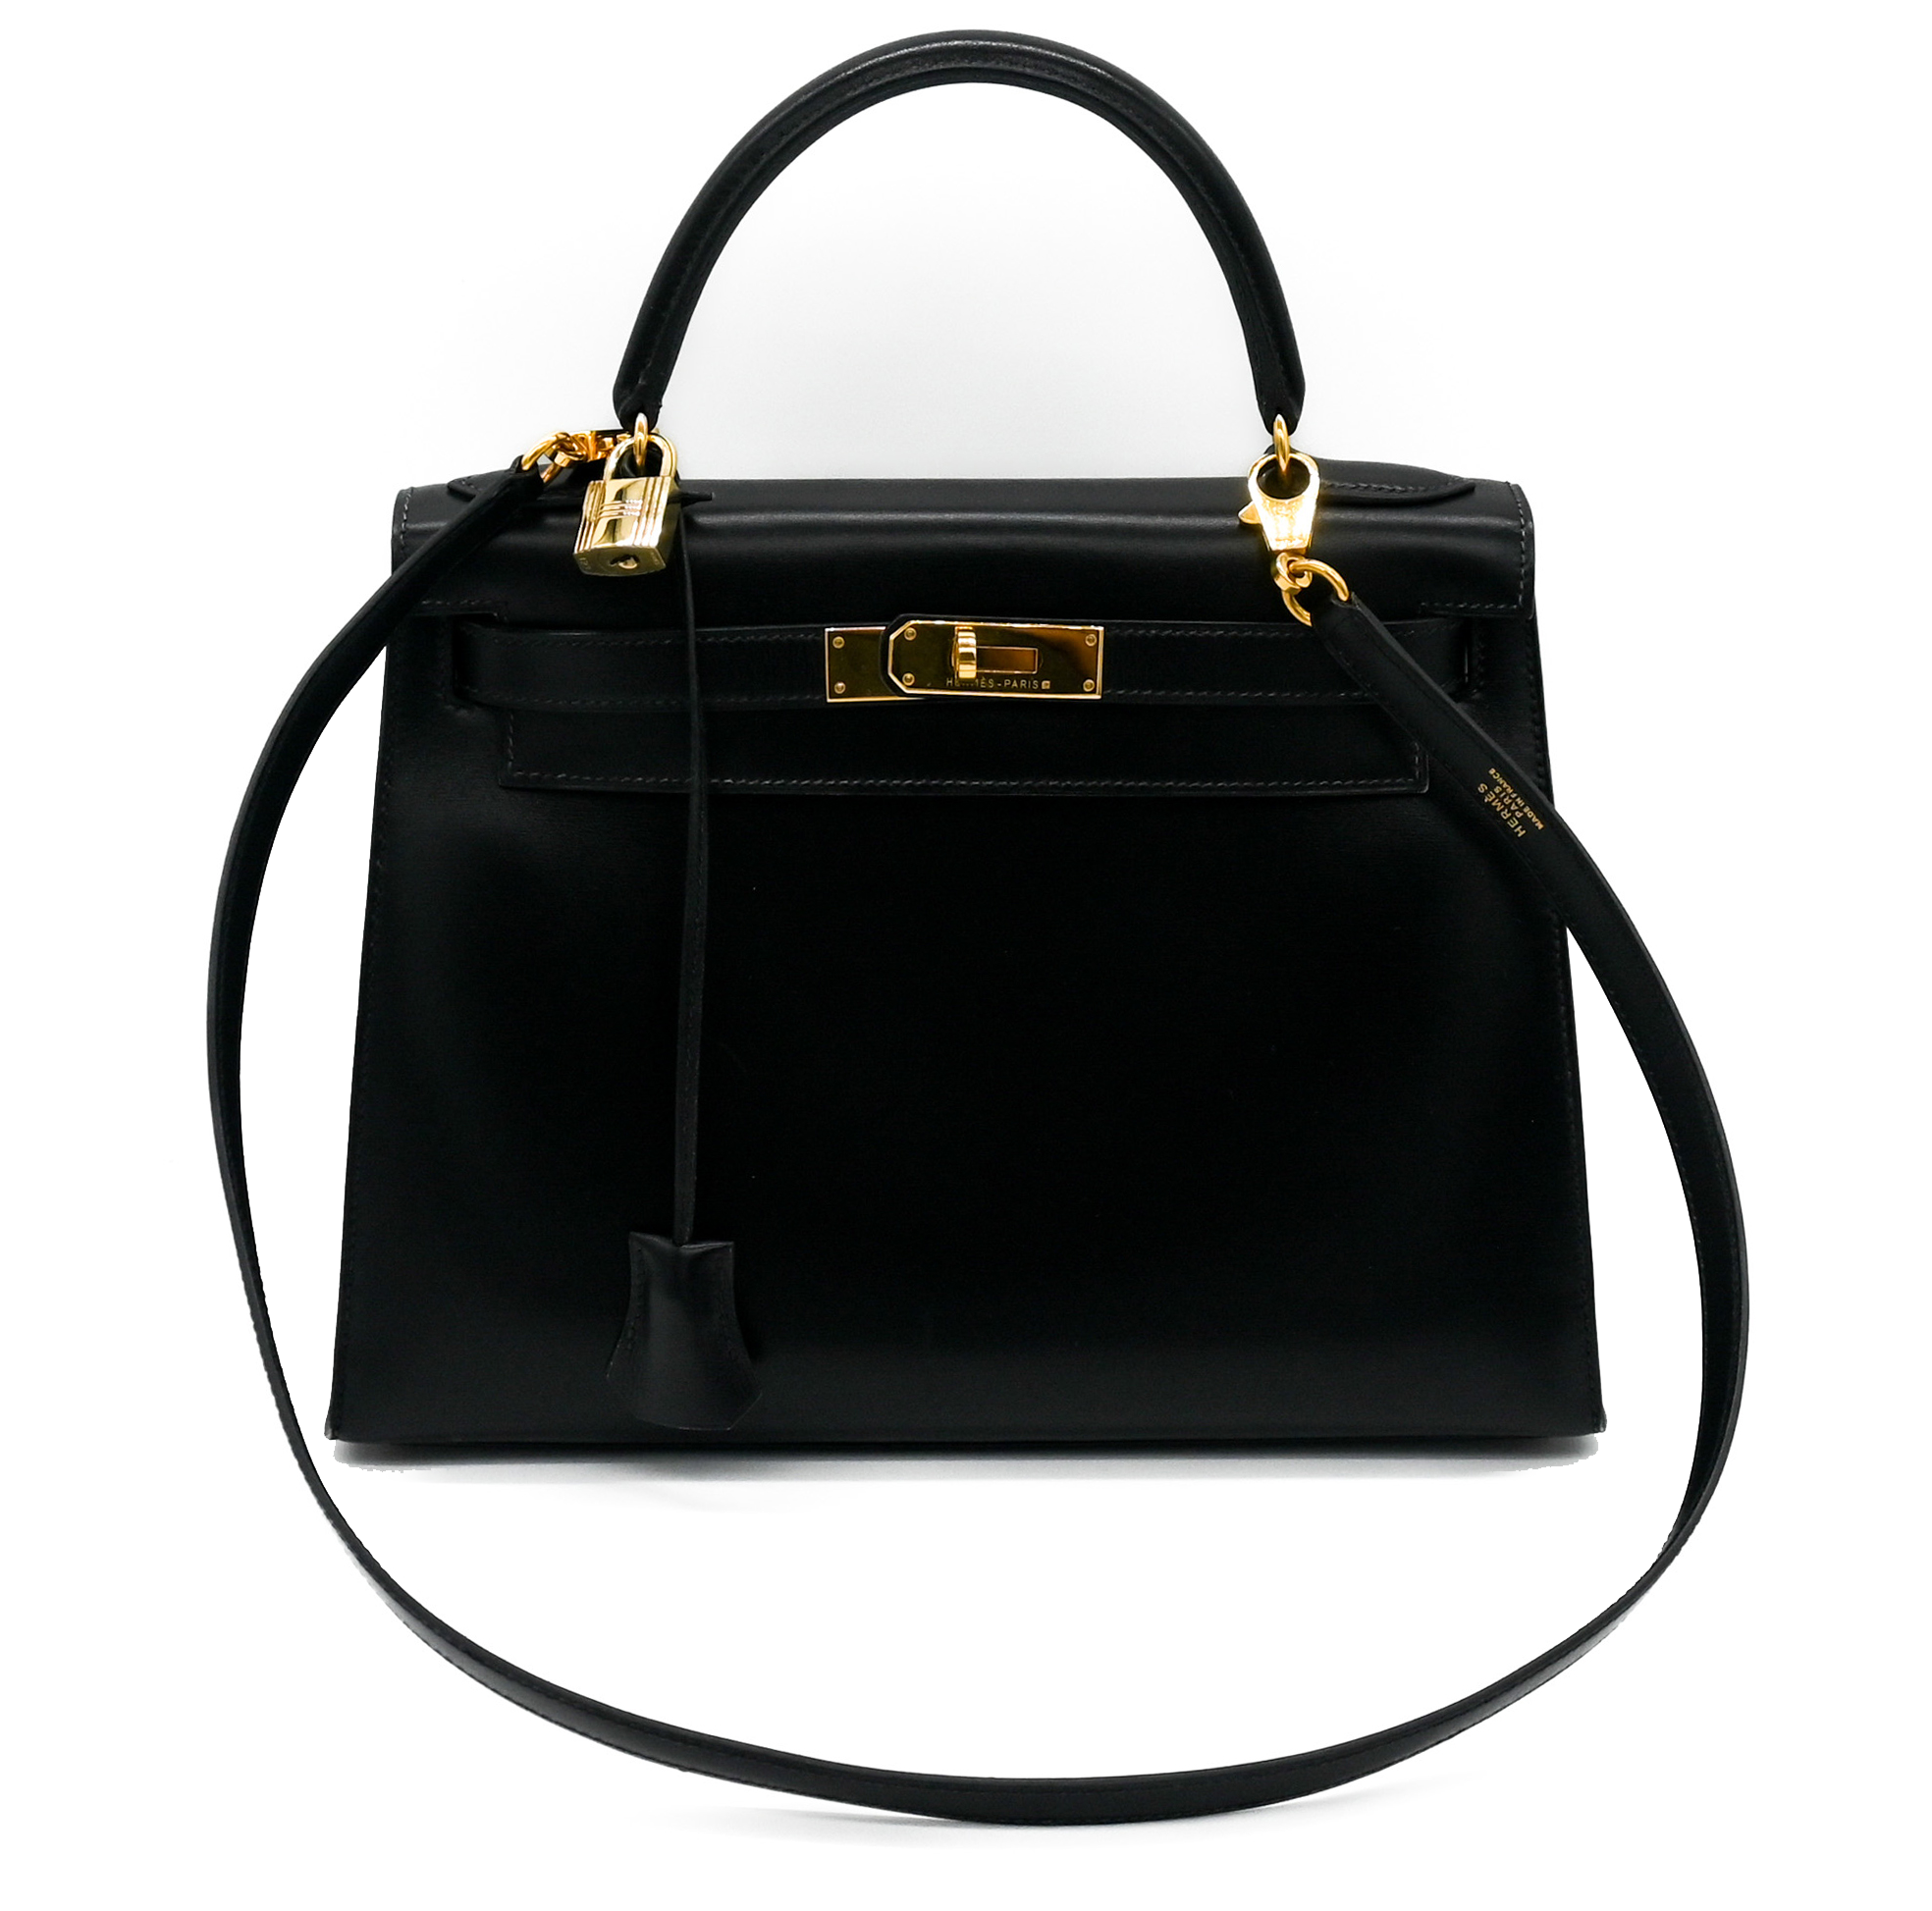 Vault 55 Hèrmes Kelly 28 Sellier Box Leather Black with Gold Hardware - Vault 55